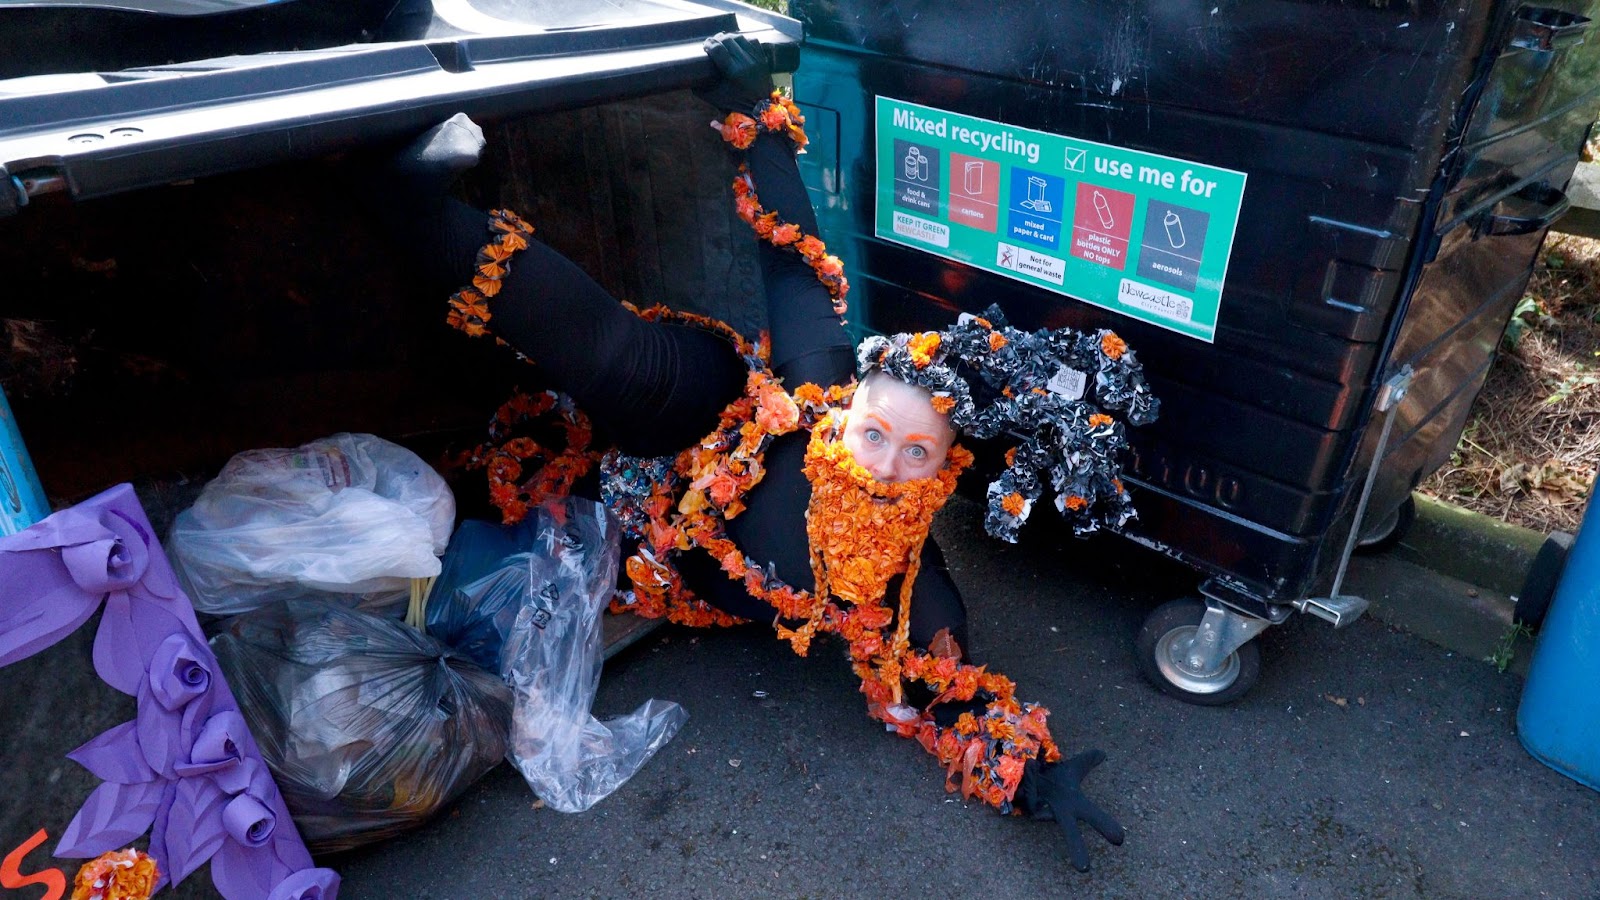 Colour photo, exterior. Kitt, a white shaven headed human, as their drag king character “Jack ‘O The Orange”. They are lying among bags of rubbish, half in, half out of a huge industrial bin, which is on its side on the street. Kitt wears a black all in one leotard covered in strings of bright orange plastic flowers. They are sporting bright orange eye brows, a Viking-esque beard made of orange plastic flowers and an antler-like headdress made of black plastic flowers. On the right hand side of the image is another industrial sized bin on which the following text is visible “Mixed recycling. Use me for” .